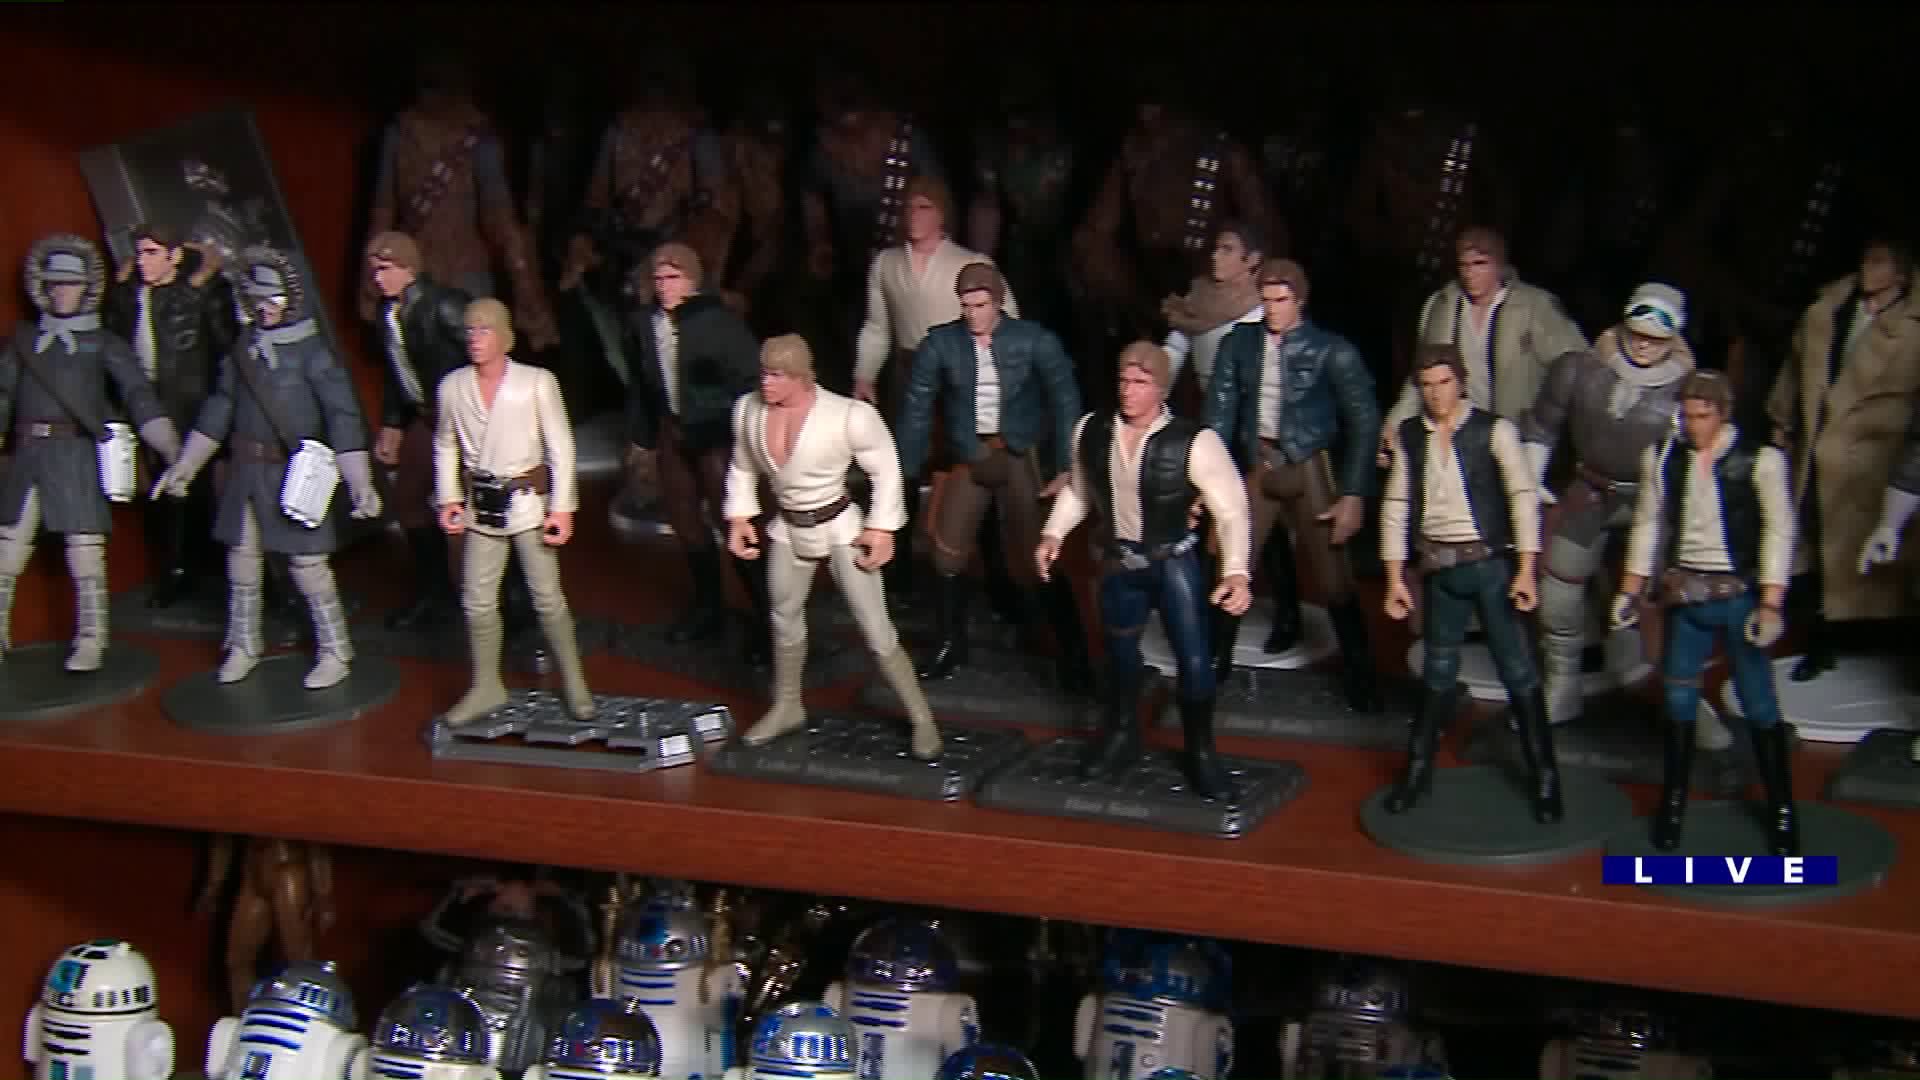 Around Town checks out Star Wars collectibles